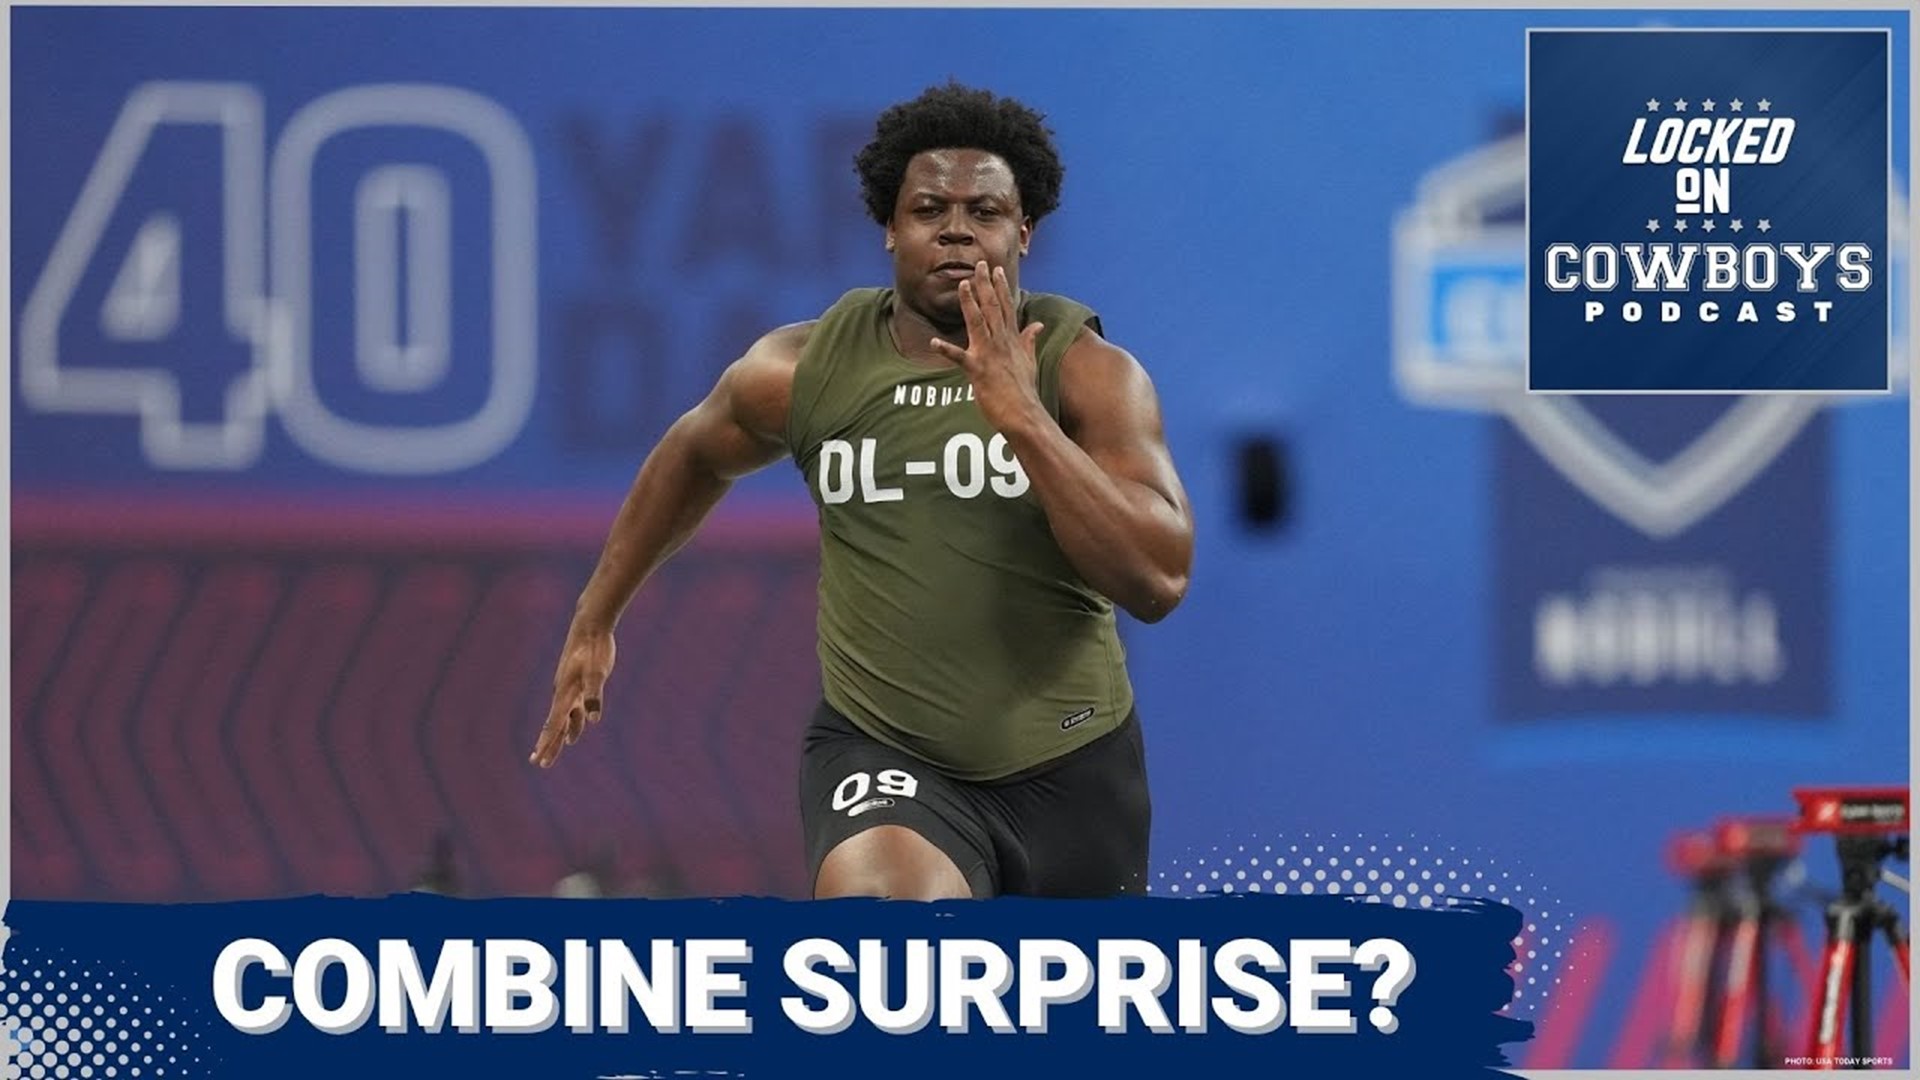 Marcus Mosher and Landon McCool discuss the biggest winners and losers from the NFL Combine. Which players stood out? Who could be a draft target for the Cowboys?